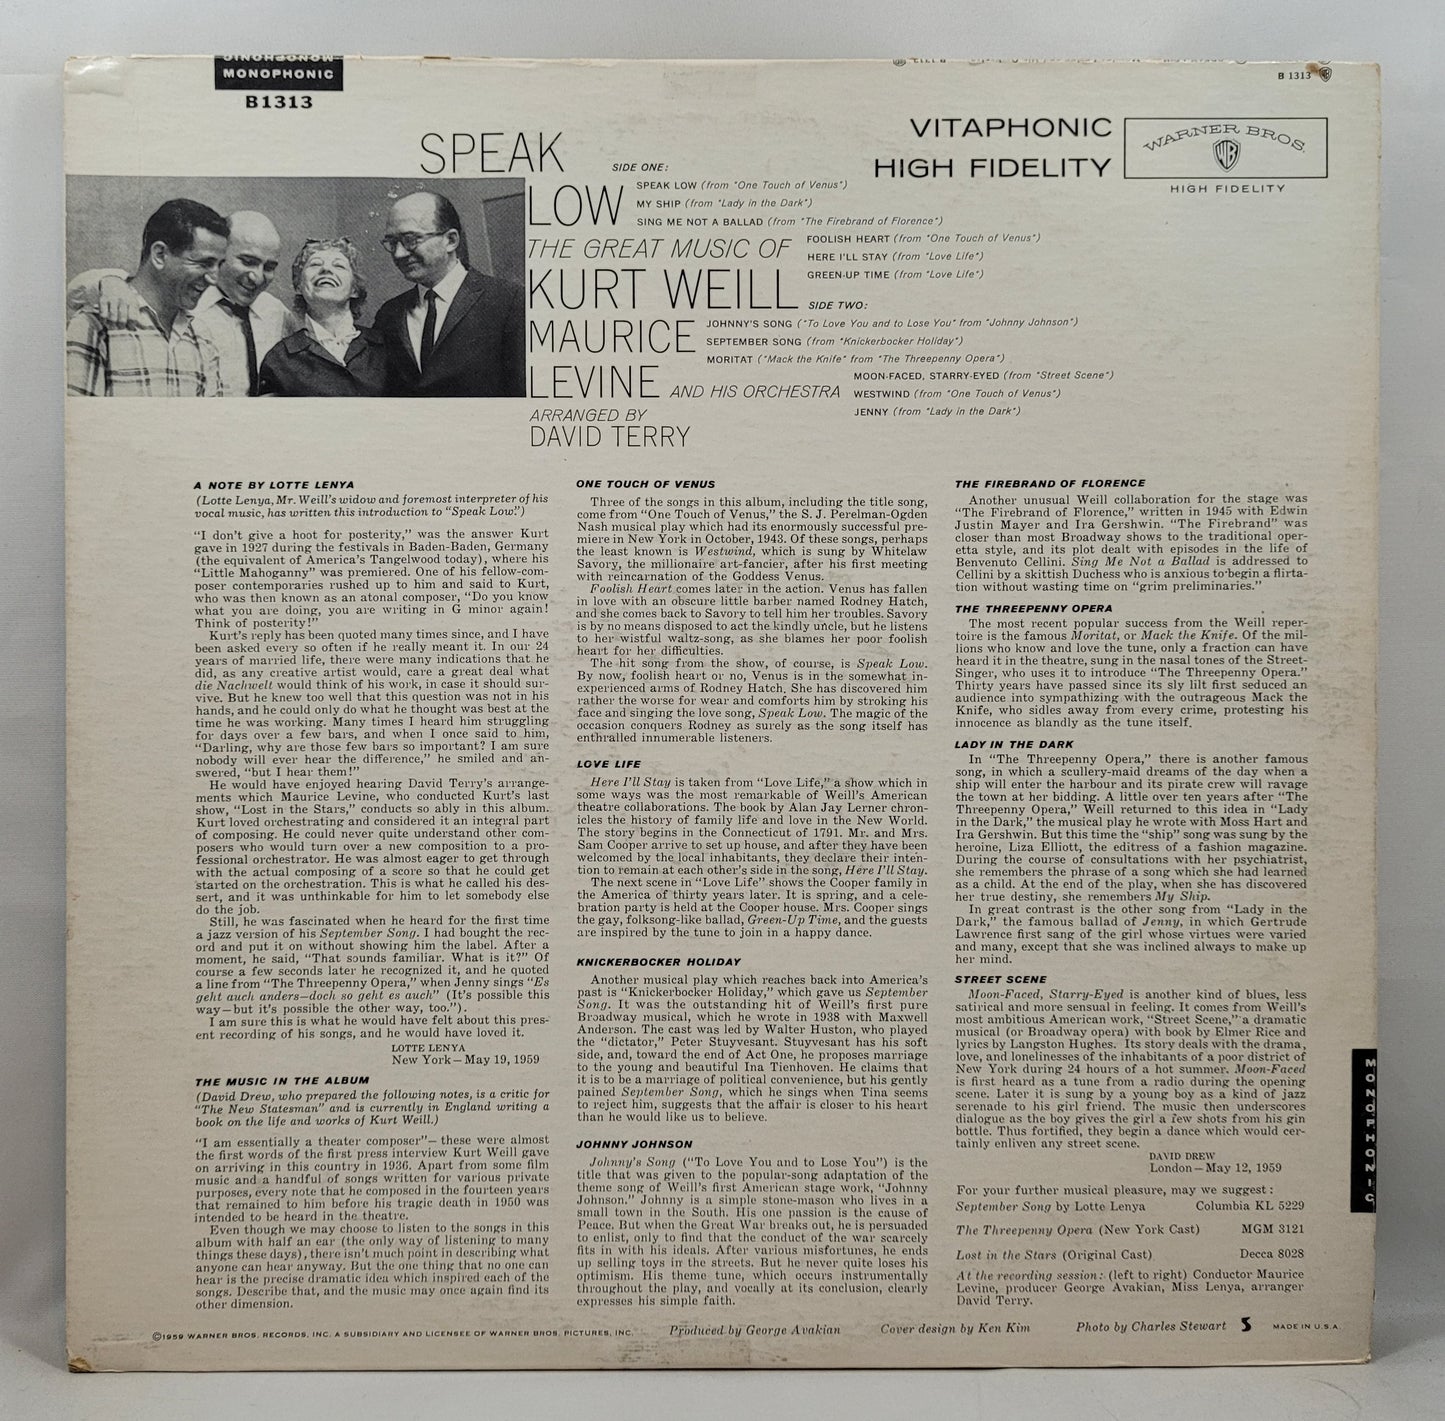 Maurice Levine - Speak Low, The Great Music of Kurt Weill for Orchestra [1959 Used Vinyl Record LP]